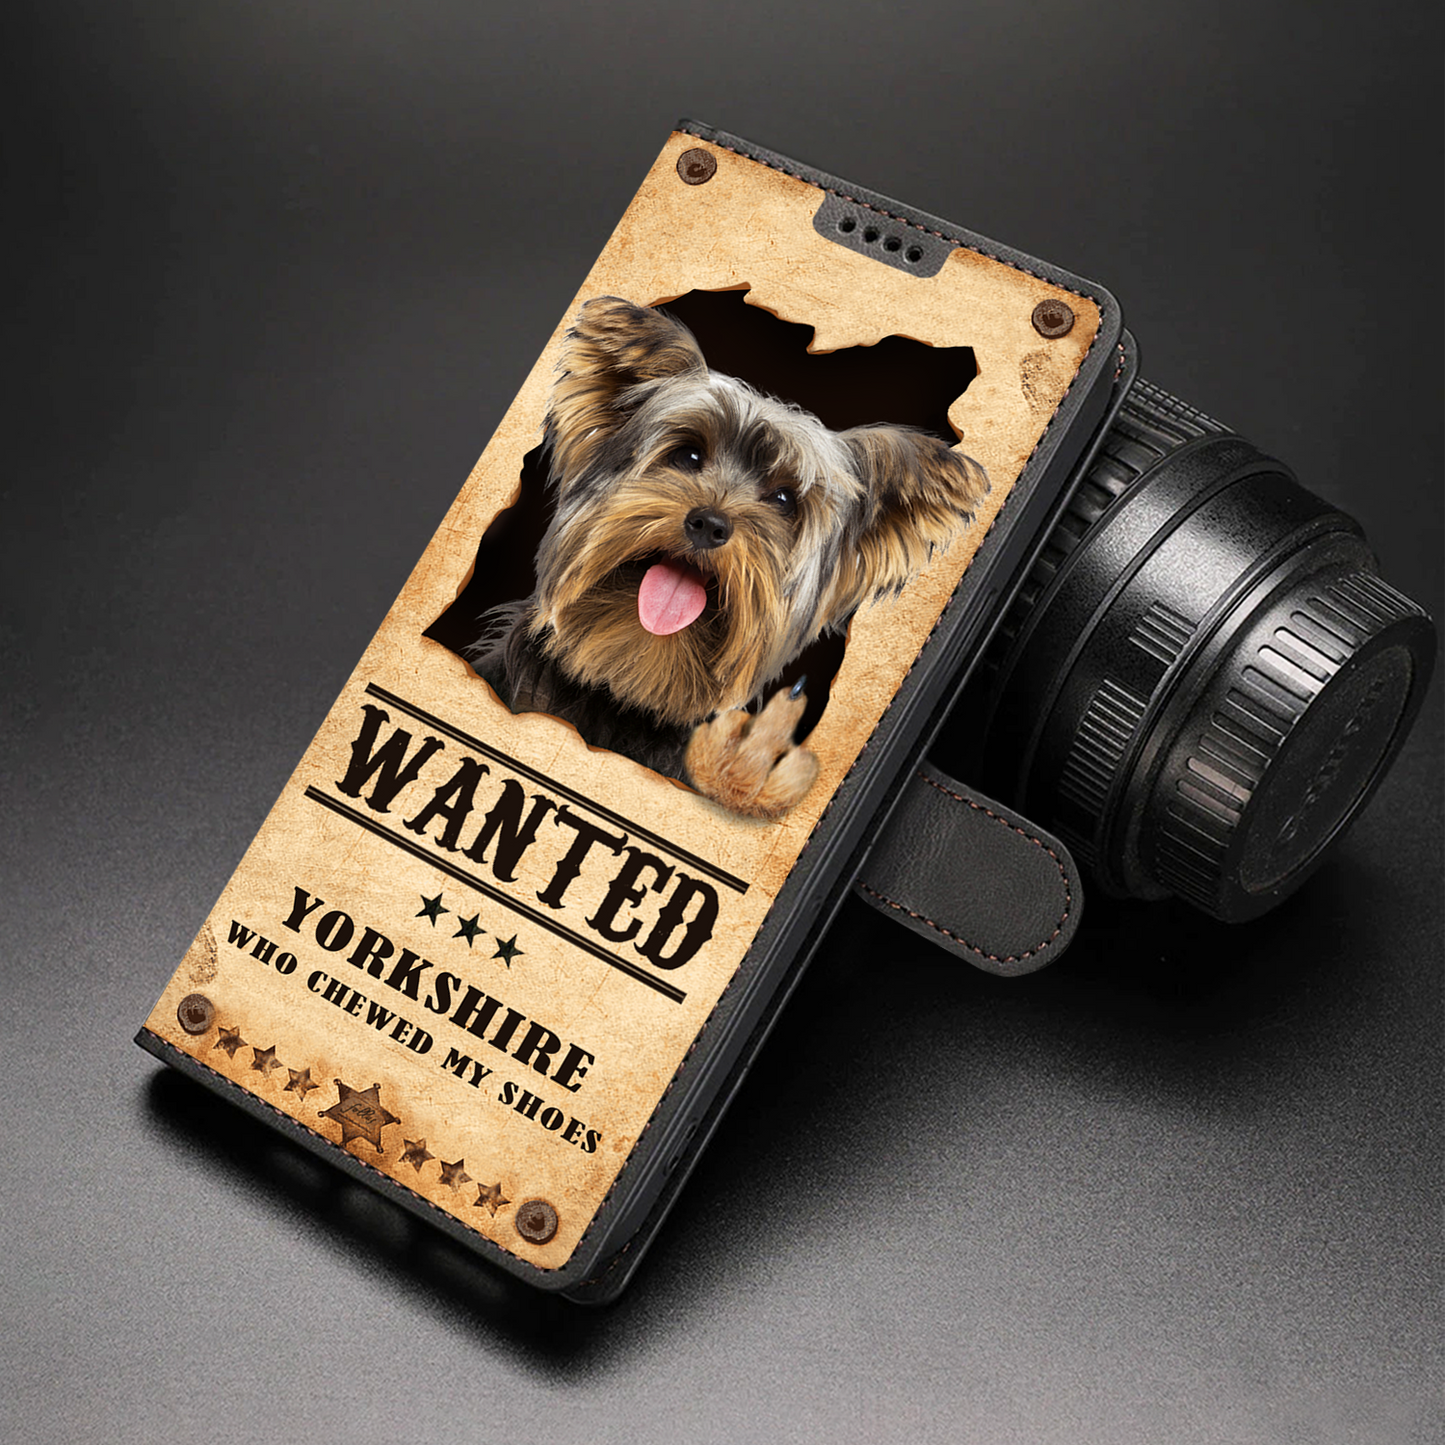 Yorkshire Terrier Wanted - Fun Wallet Phone Case V1